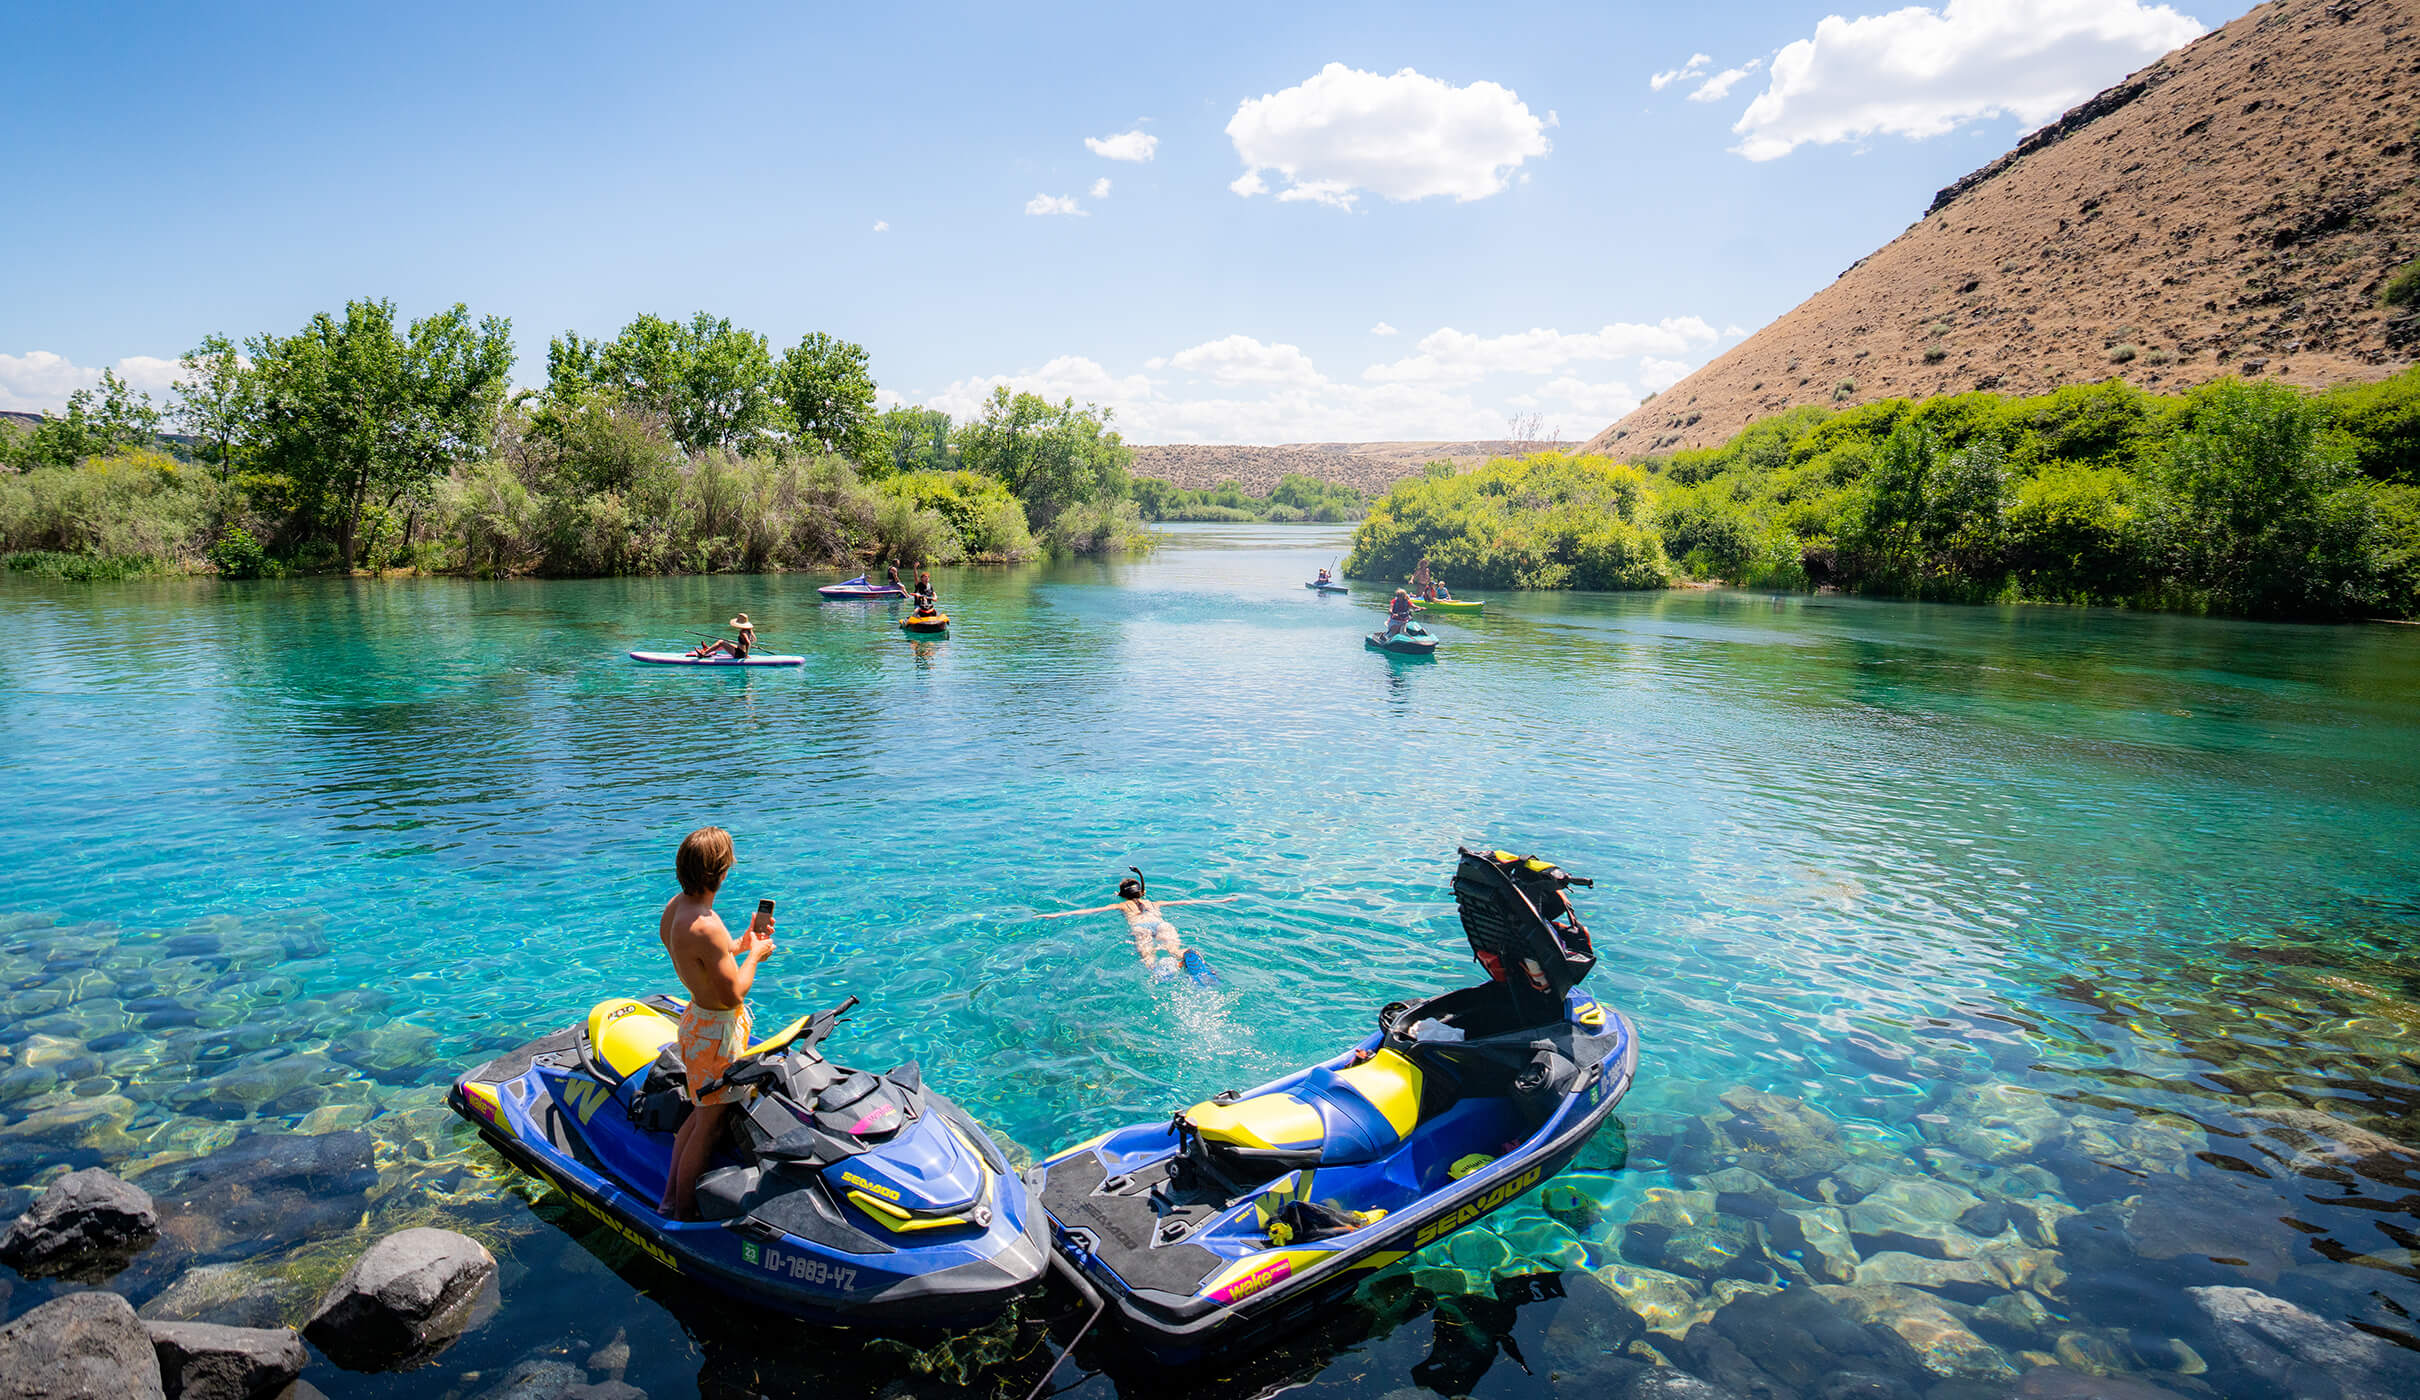 People on jet skis and paddle boards enjoy the scenic blue water at Blue Heart Springs.